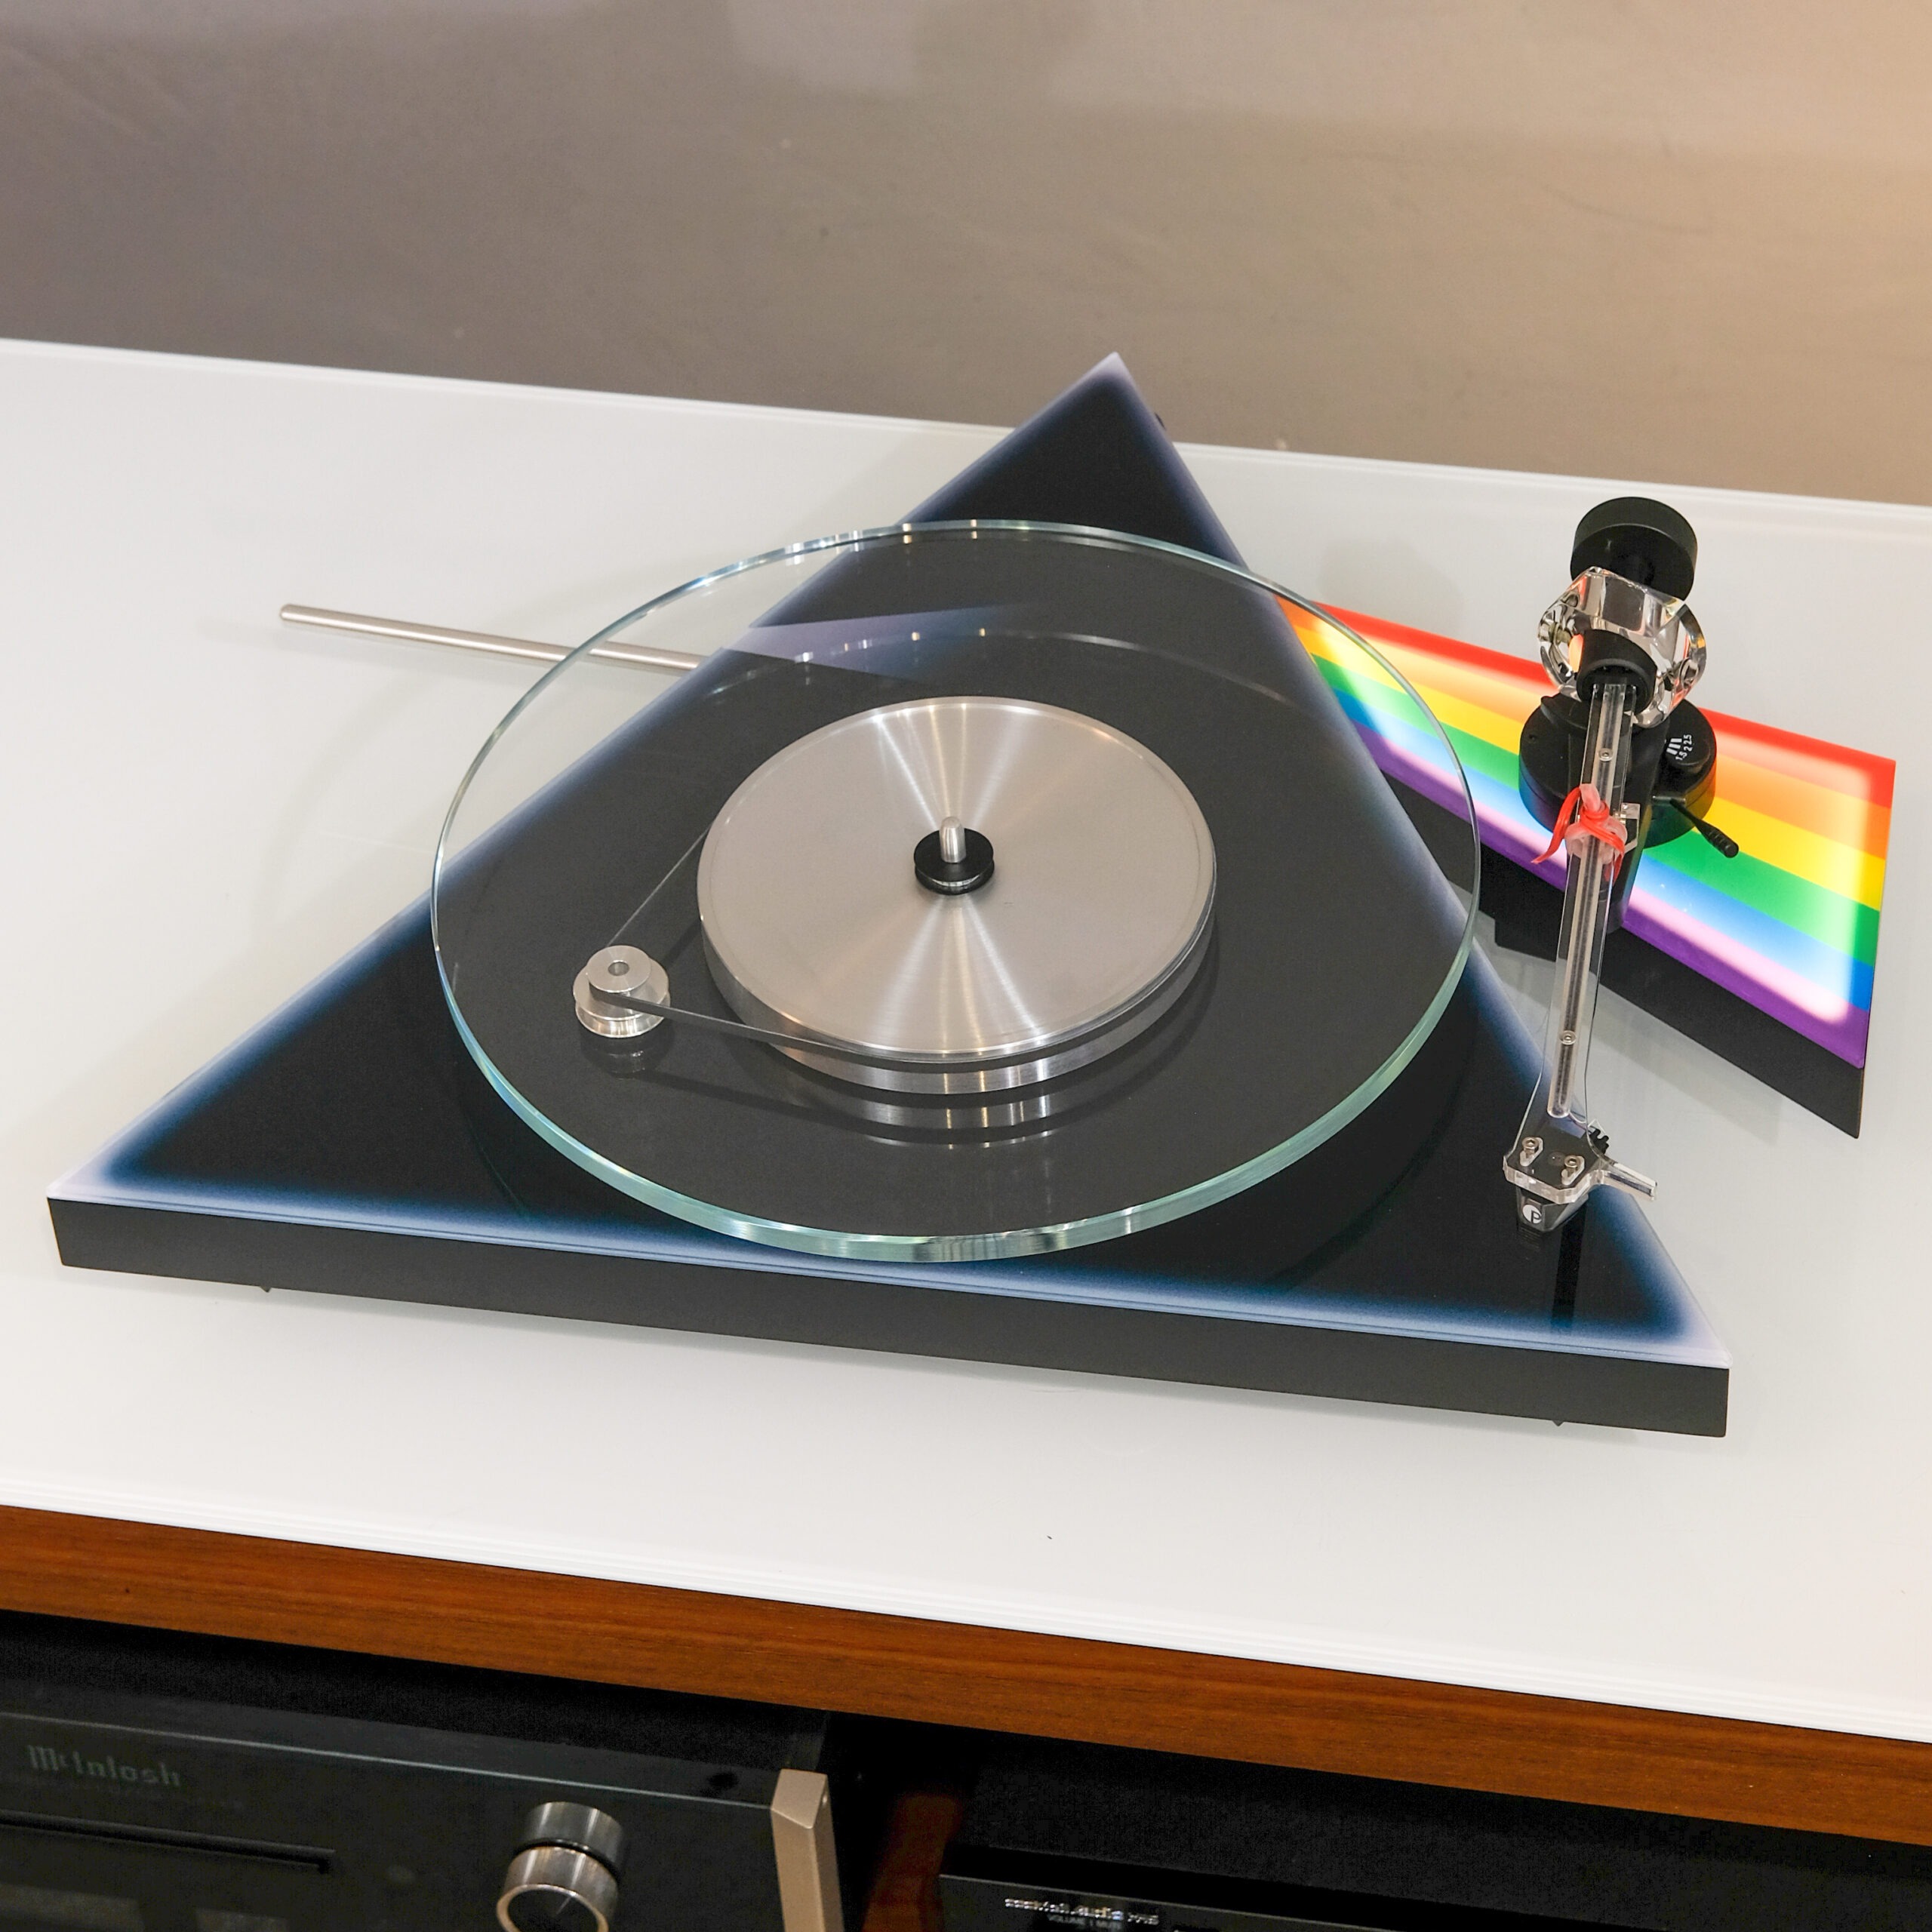 Pro-Ject-The-Dark-Side-of-the-Moon-Giradischi-Trazione-a-cinghia-Serie-Limited-Edition-2-scaled.jpg